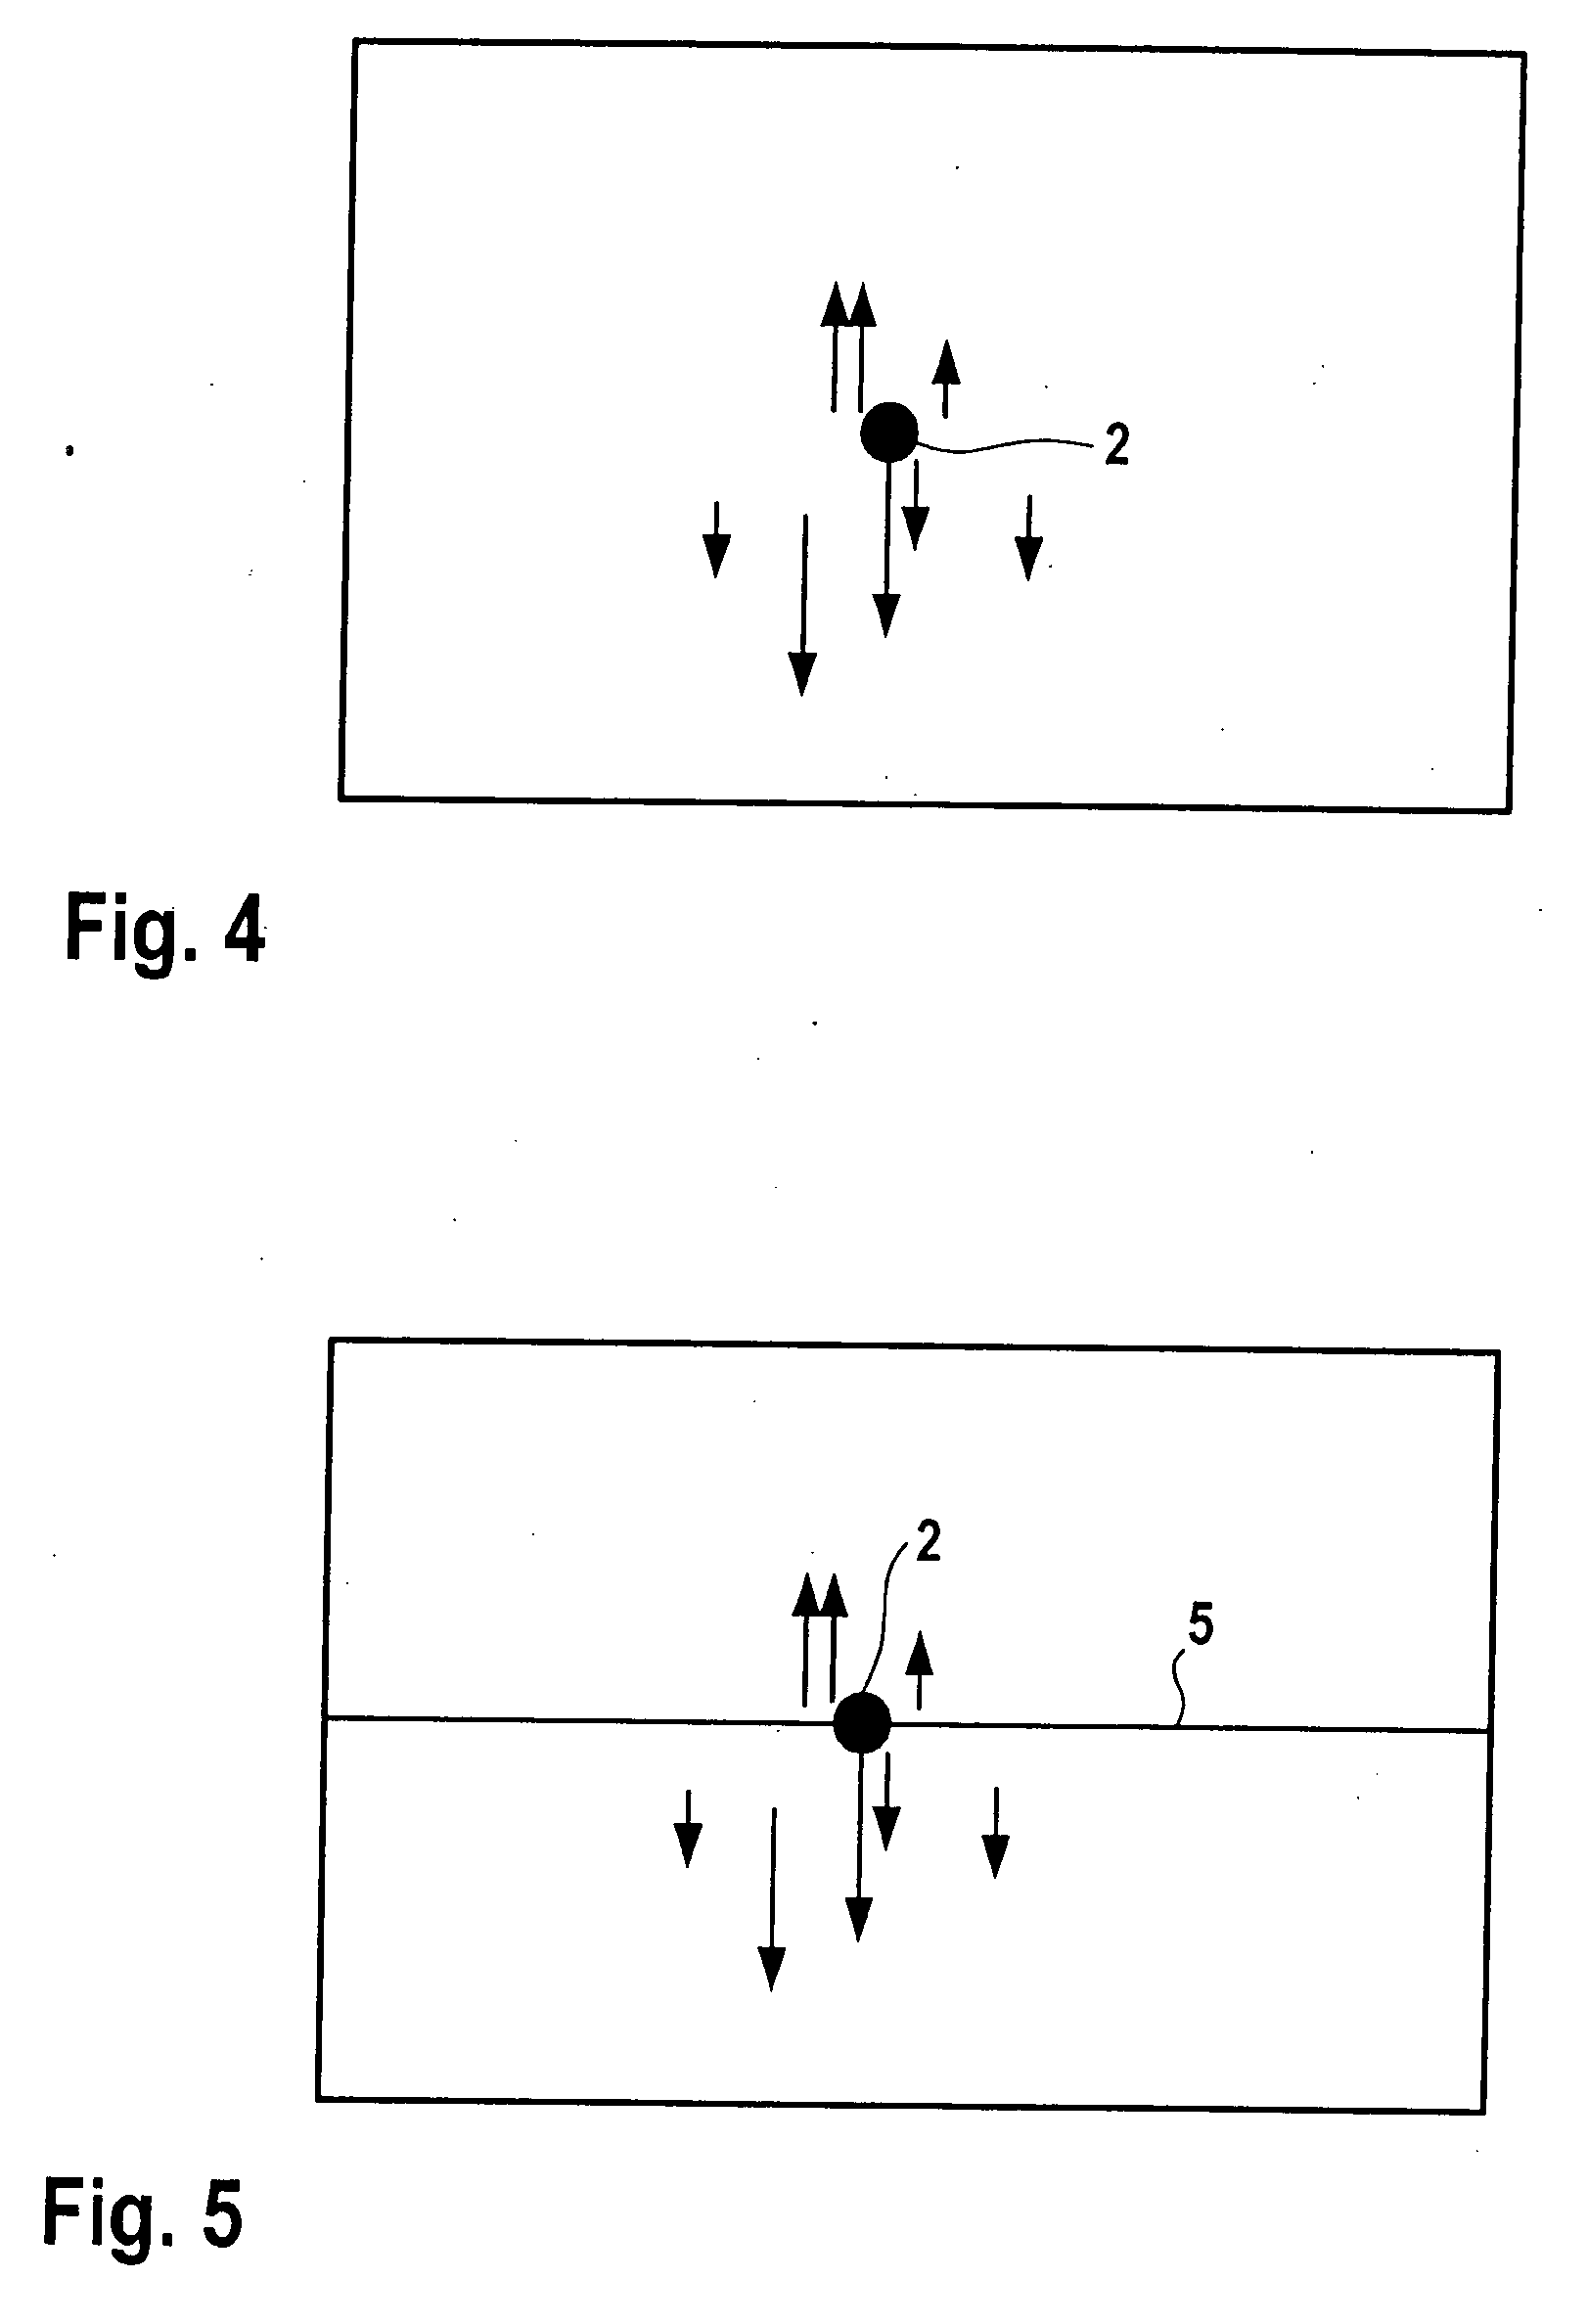 Method for Detecting an Optical Structure